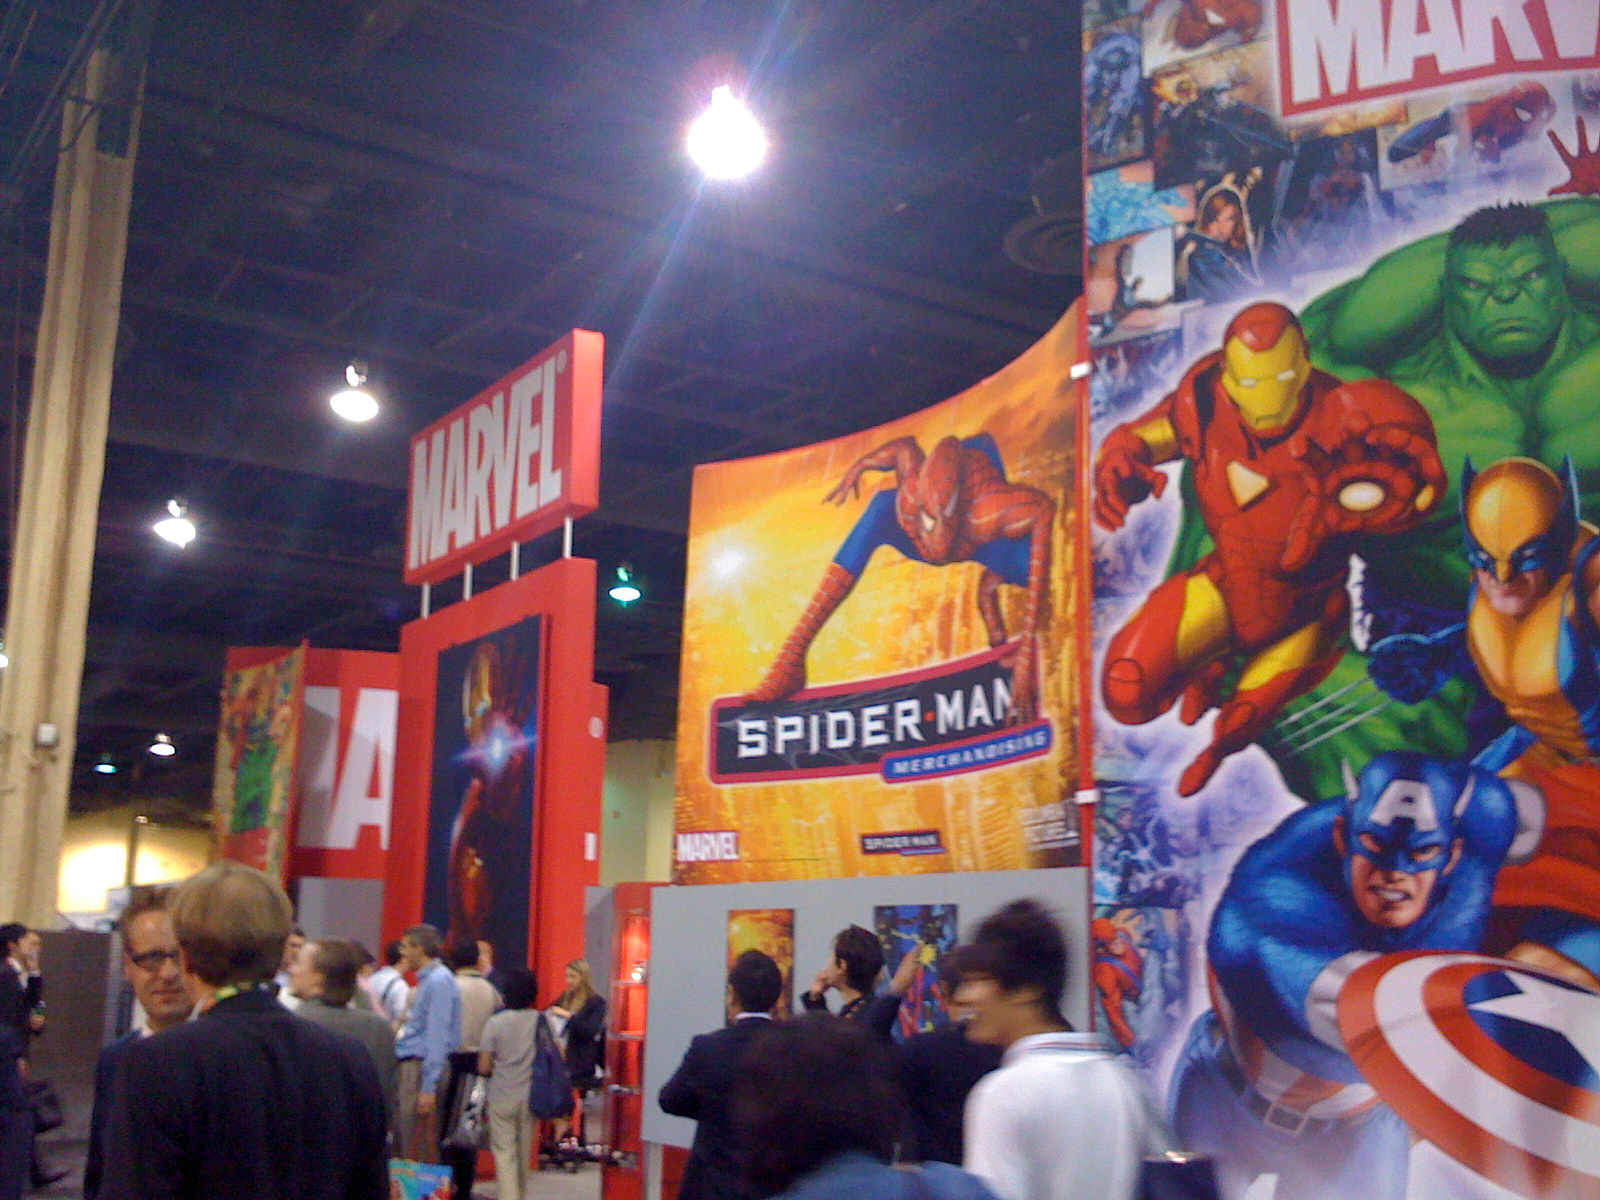 Marvel at Licensing Expo 2009